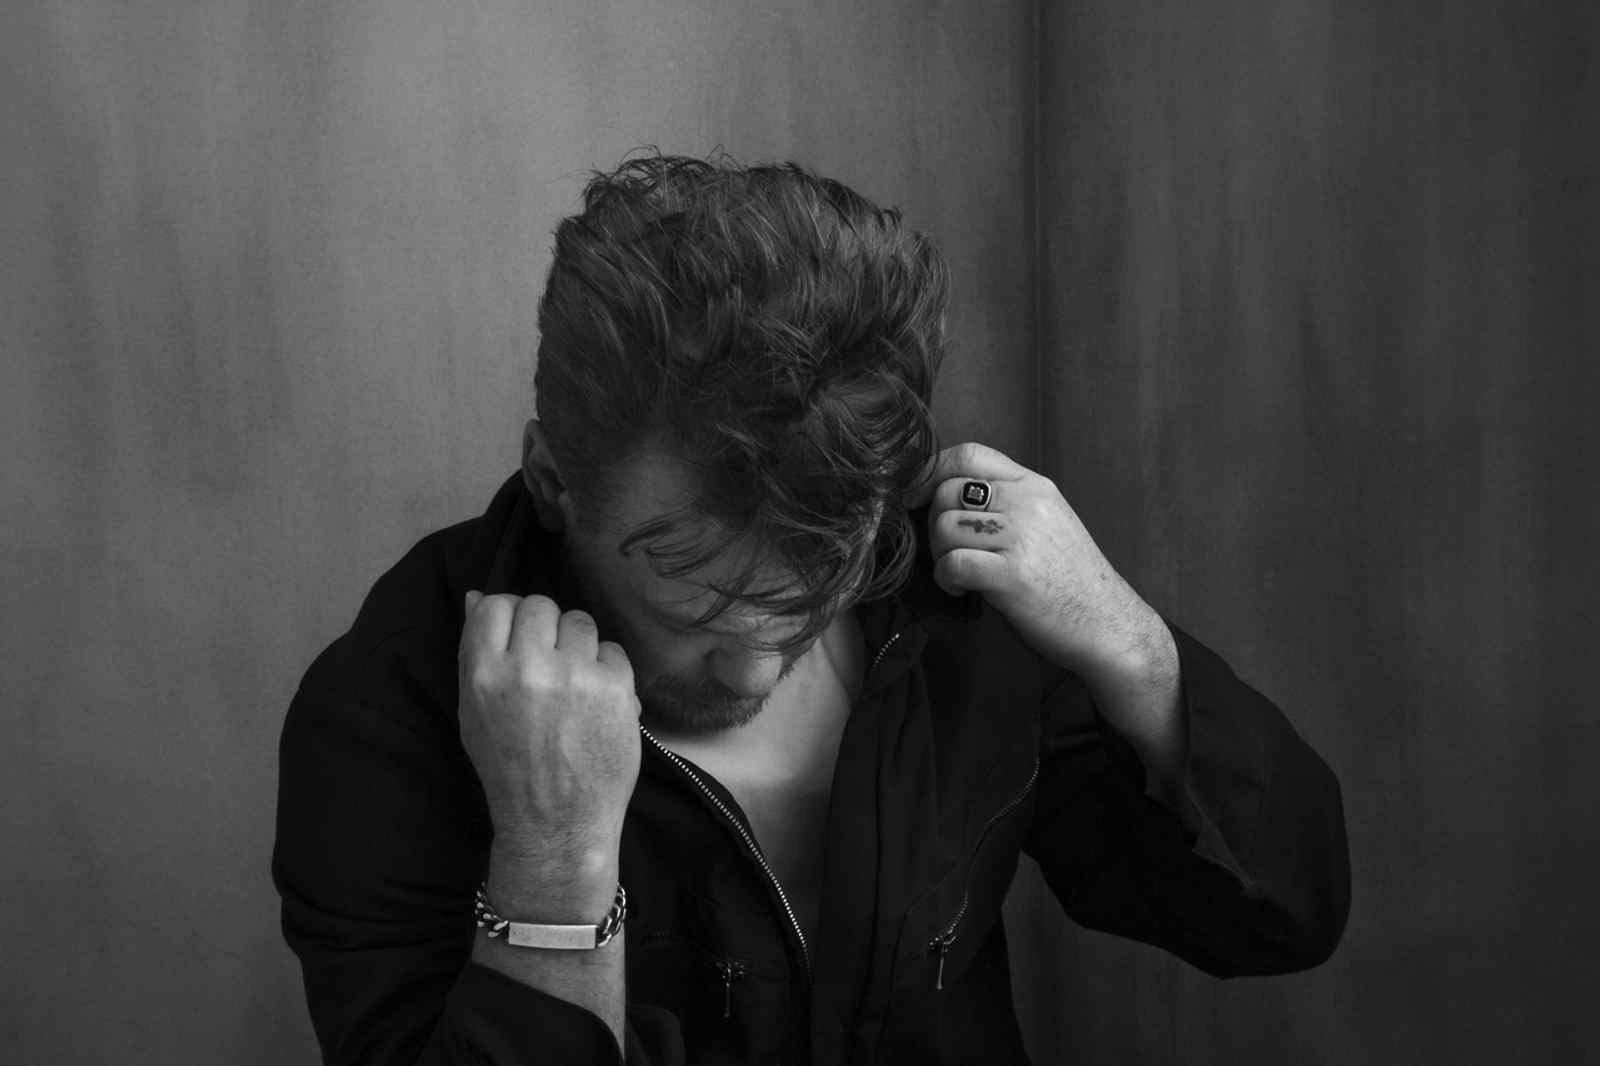 Mellencamp Returned To The Studio To Finish Recording His 26th Album This Summer